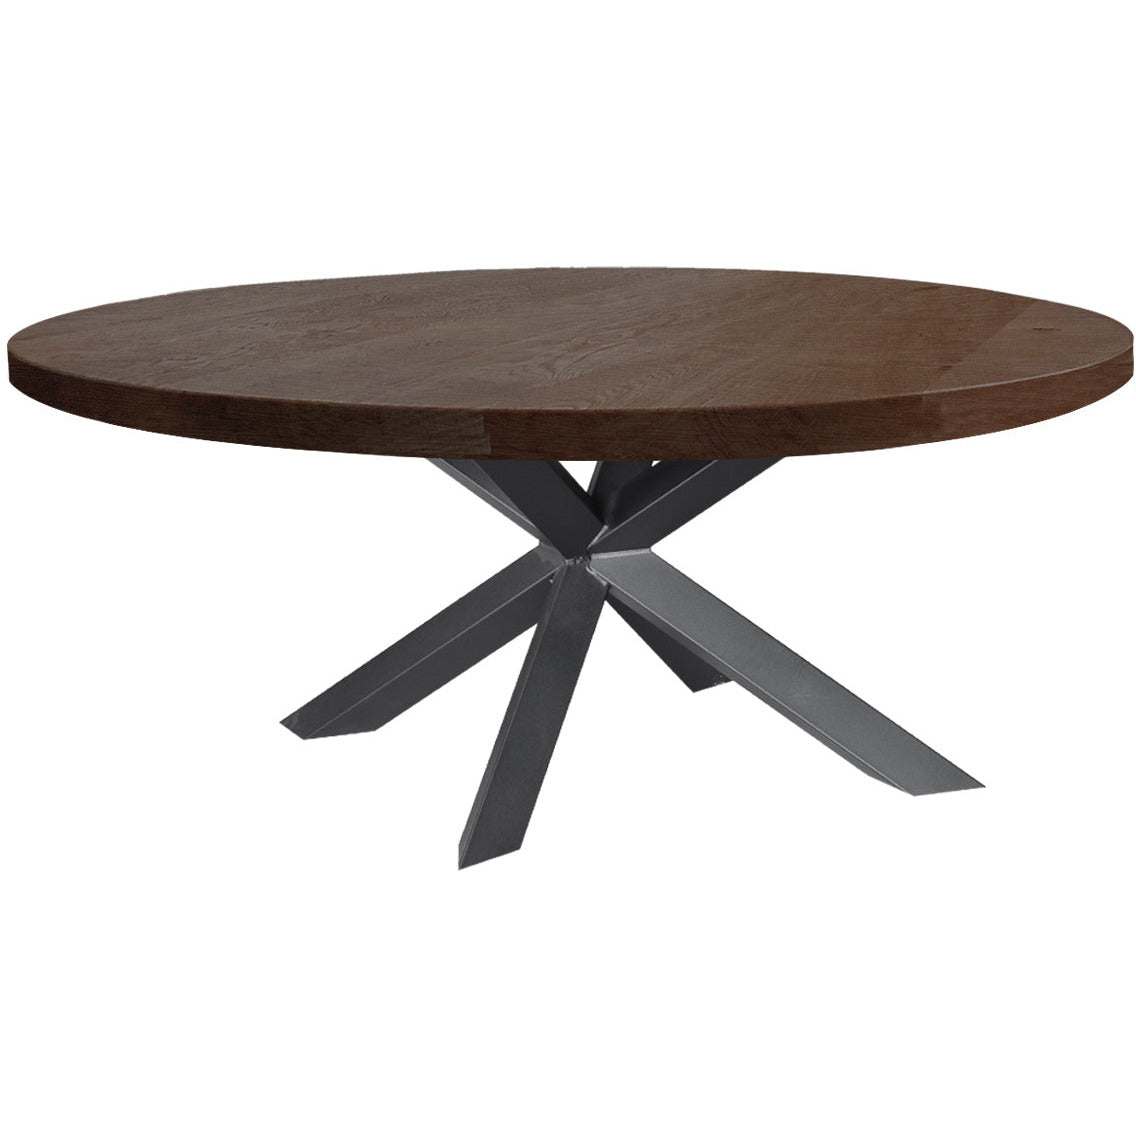 Dining table | Oval | Dark brown | Oak wood | Lacquered | Spiderpaw